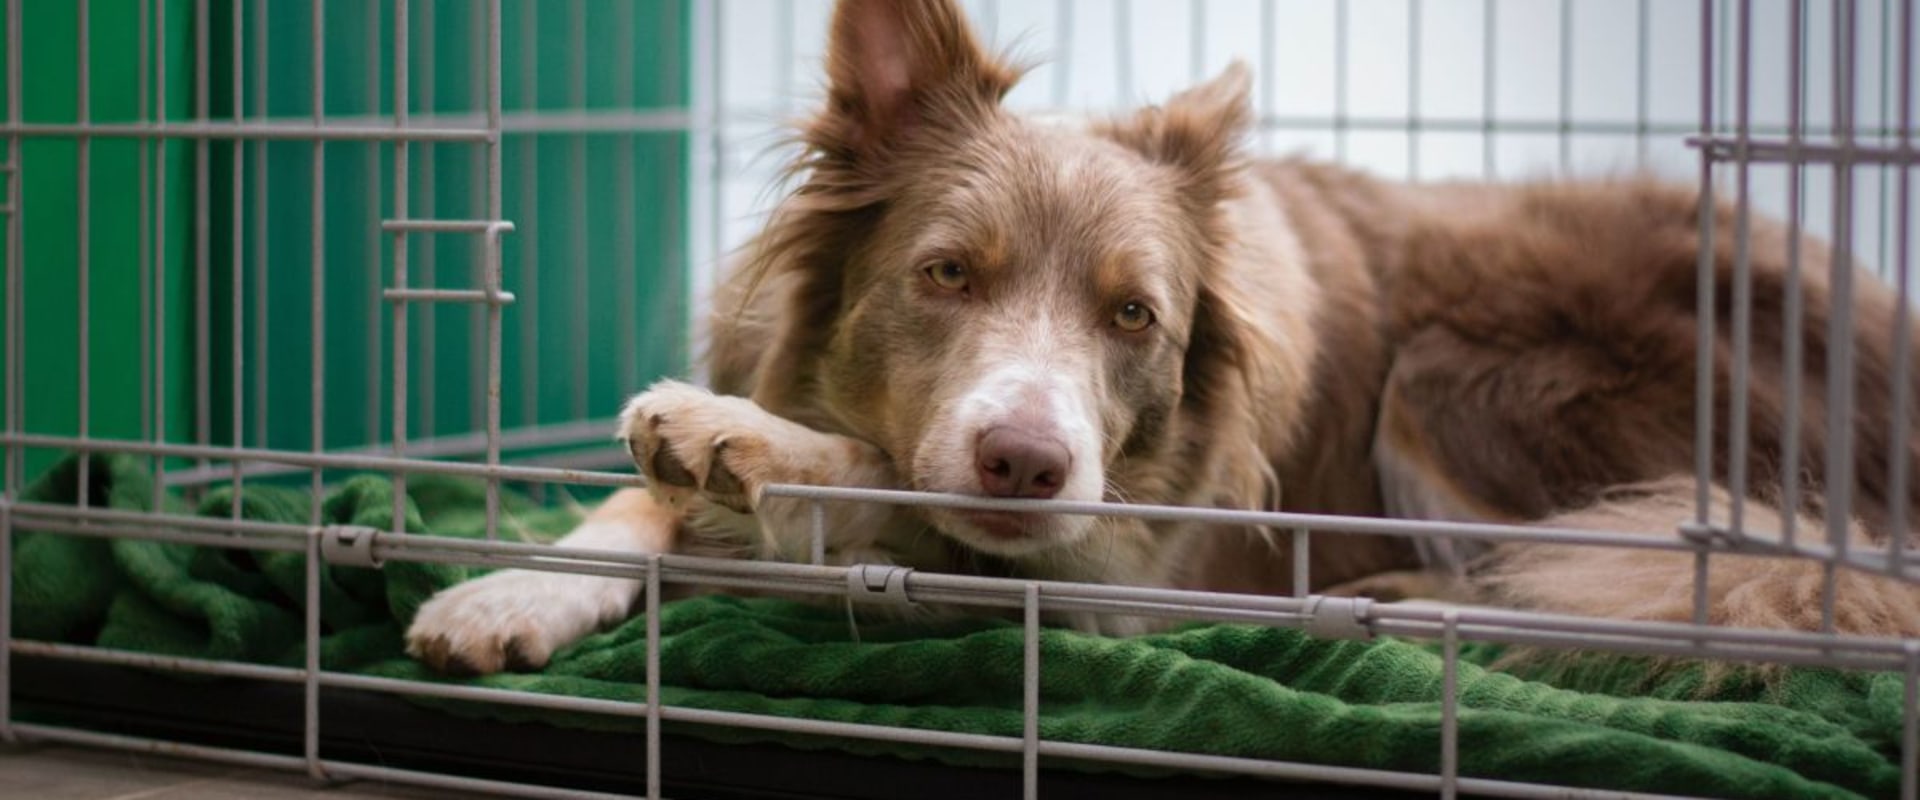 Are there any additional activities available for dogs at a dog kennel service?